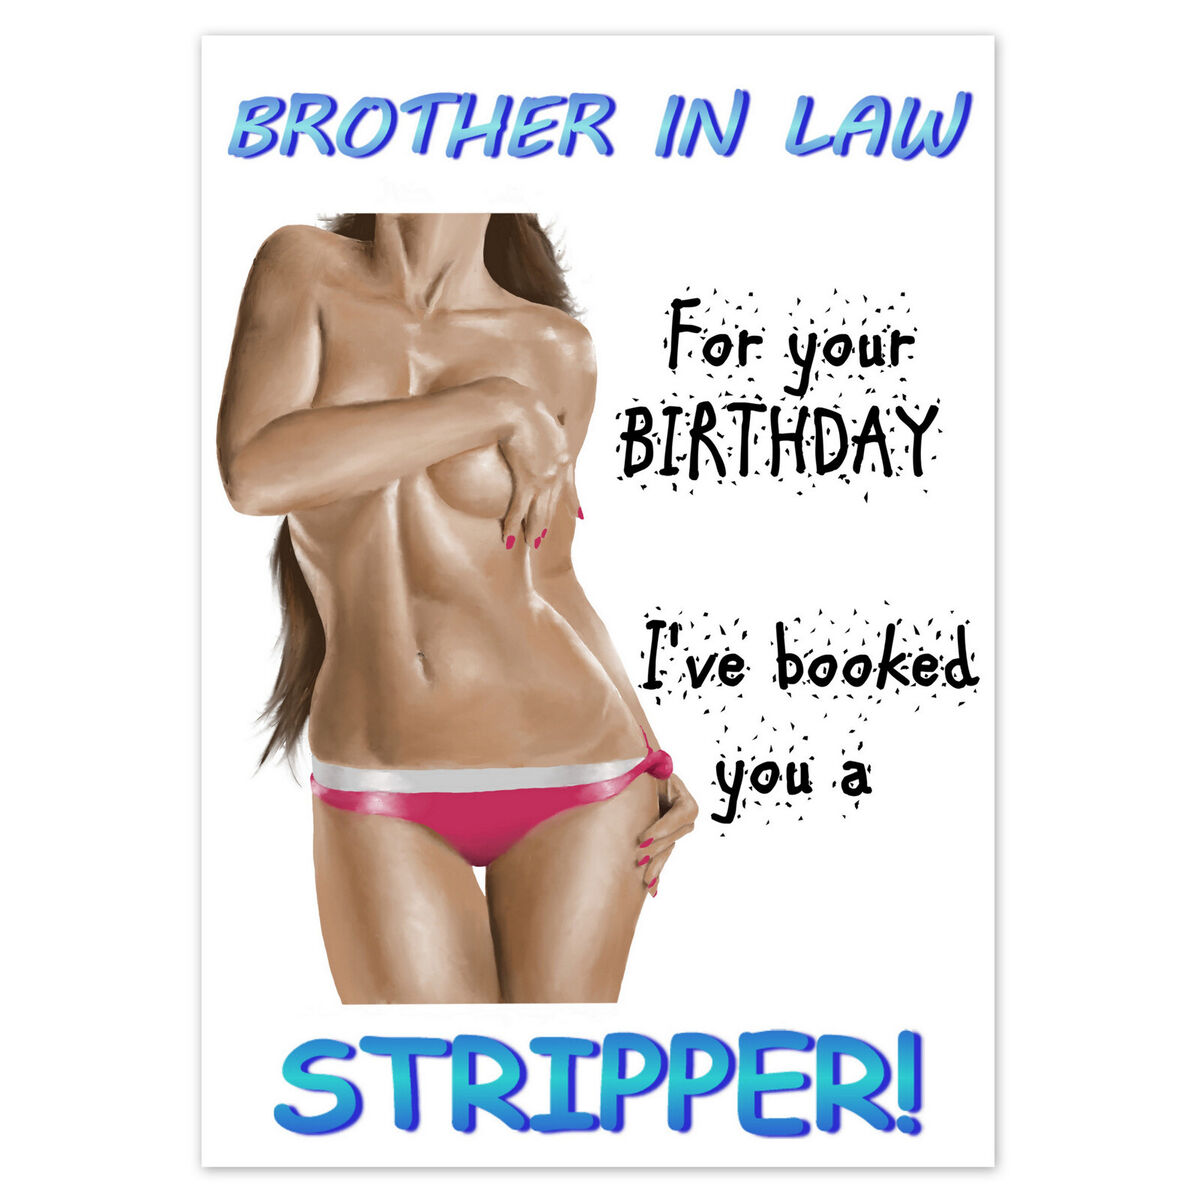 andrew j hudson recommends happy birthday strip tease pic